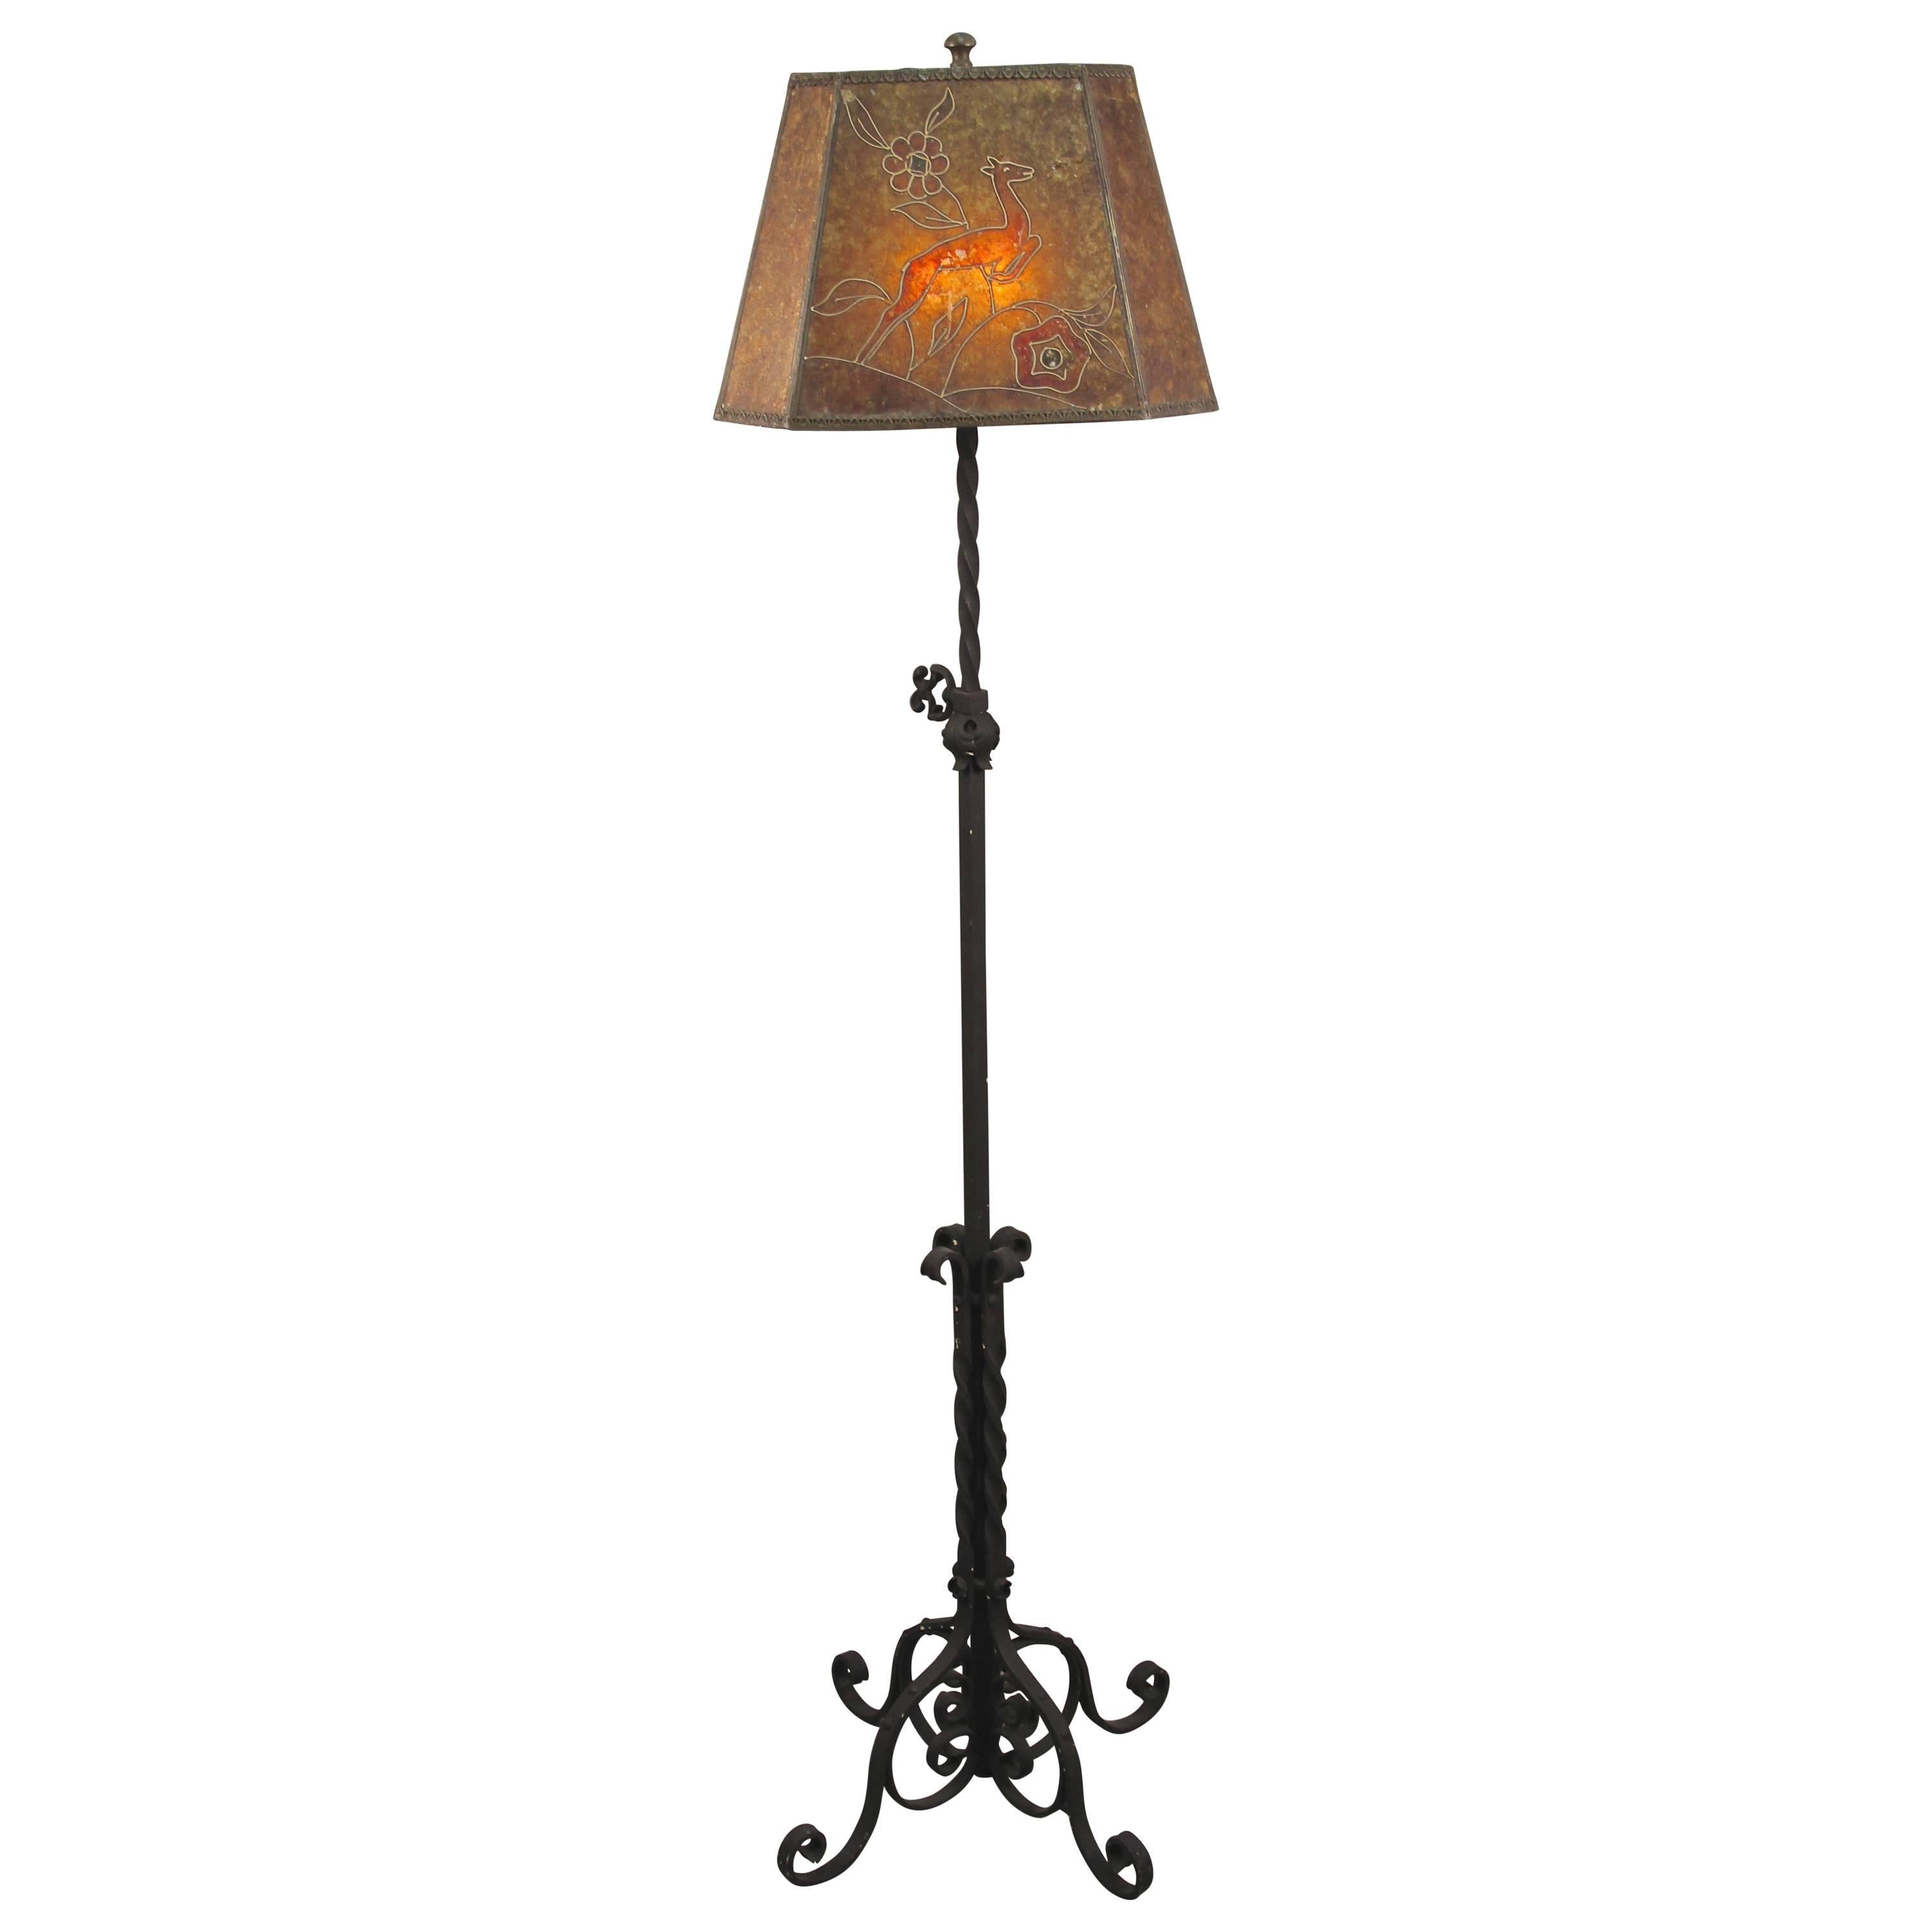 Spanish Revival 1920s Floor Lamp with Mica Shade